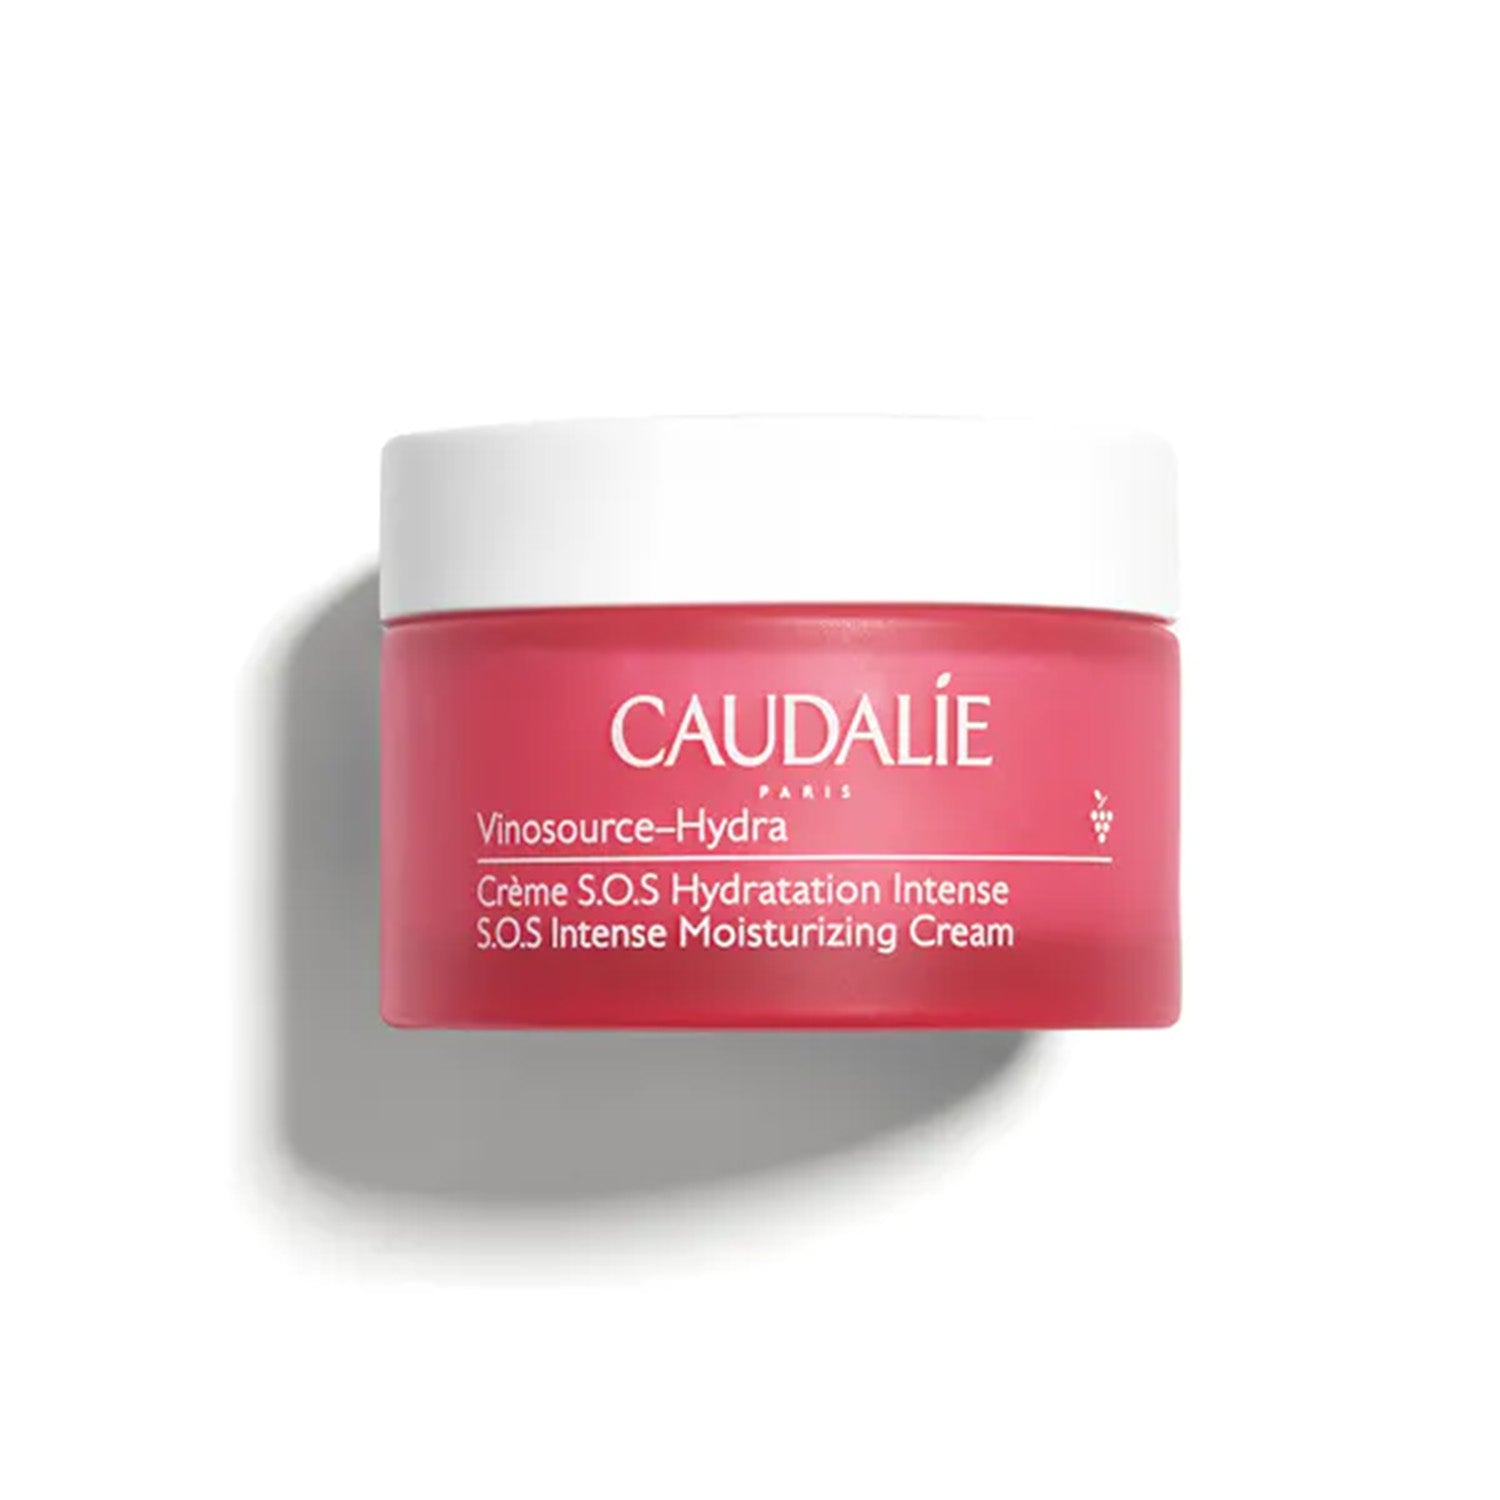 Caudalie Vinosource-Hydra S.O.S Intense Hydration Cream offers a rescue for the most sensitive of dry skin, intensely hydrating, reducing redness and tightness to repair the damage caused by environmental stresses. 